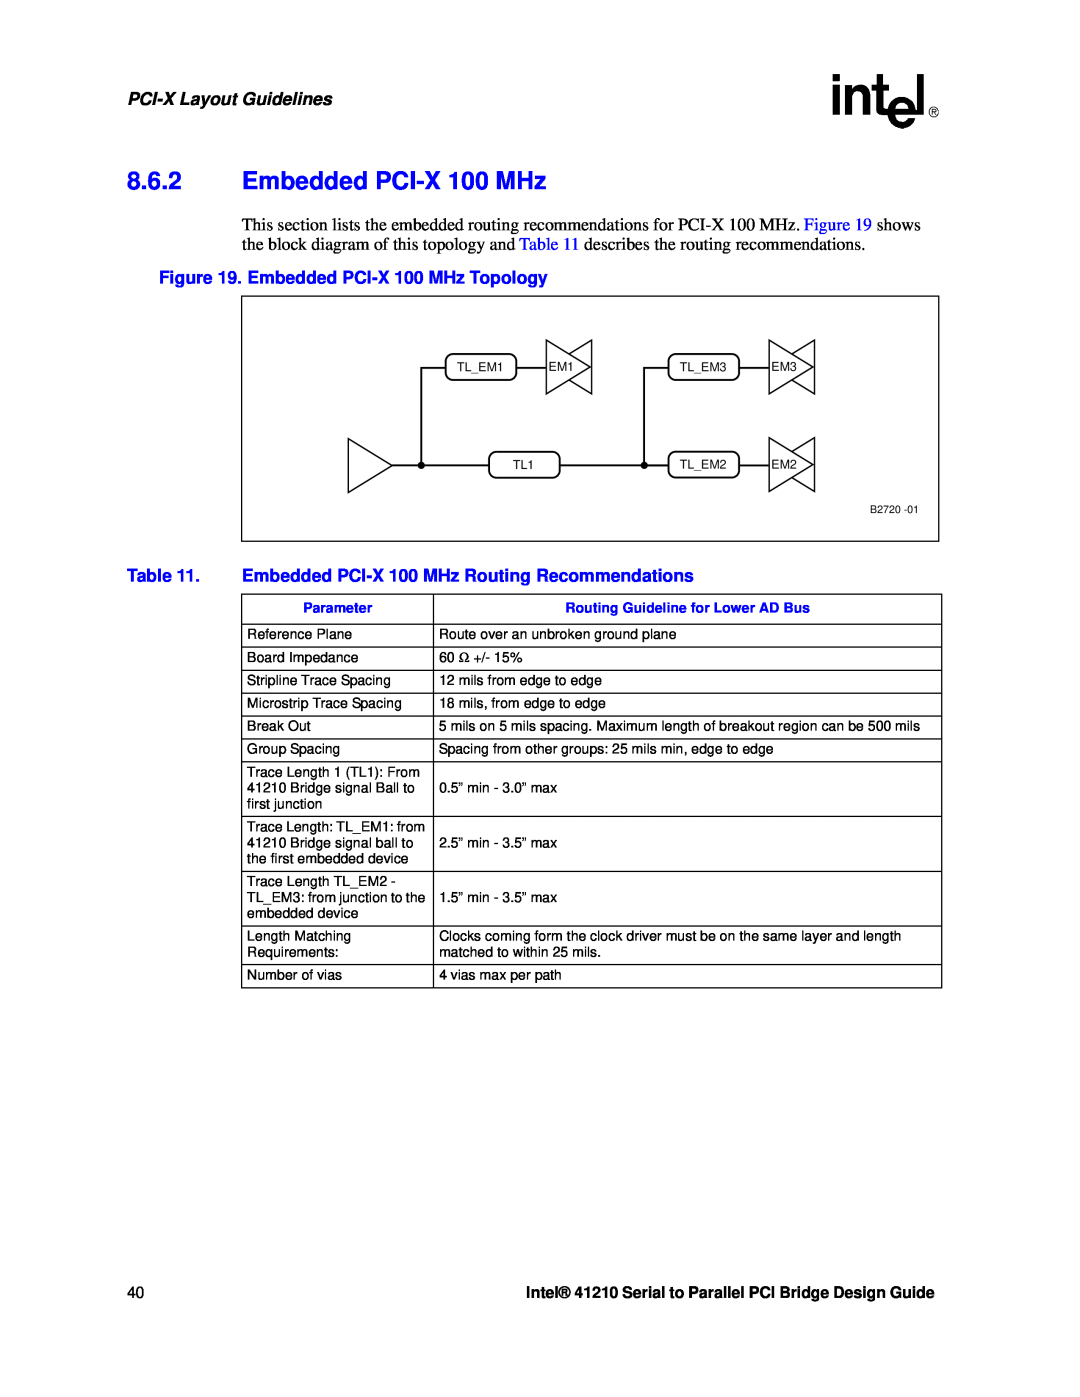 Intel 41210 Embedded PCI-X 100 MHz Topology, Embedded PCI-X 100 MHz Routing Recommendations, PCI-X Layout Guidelines 